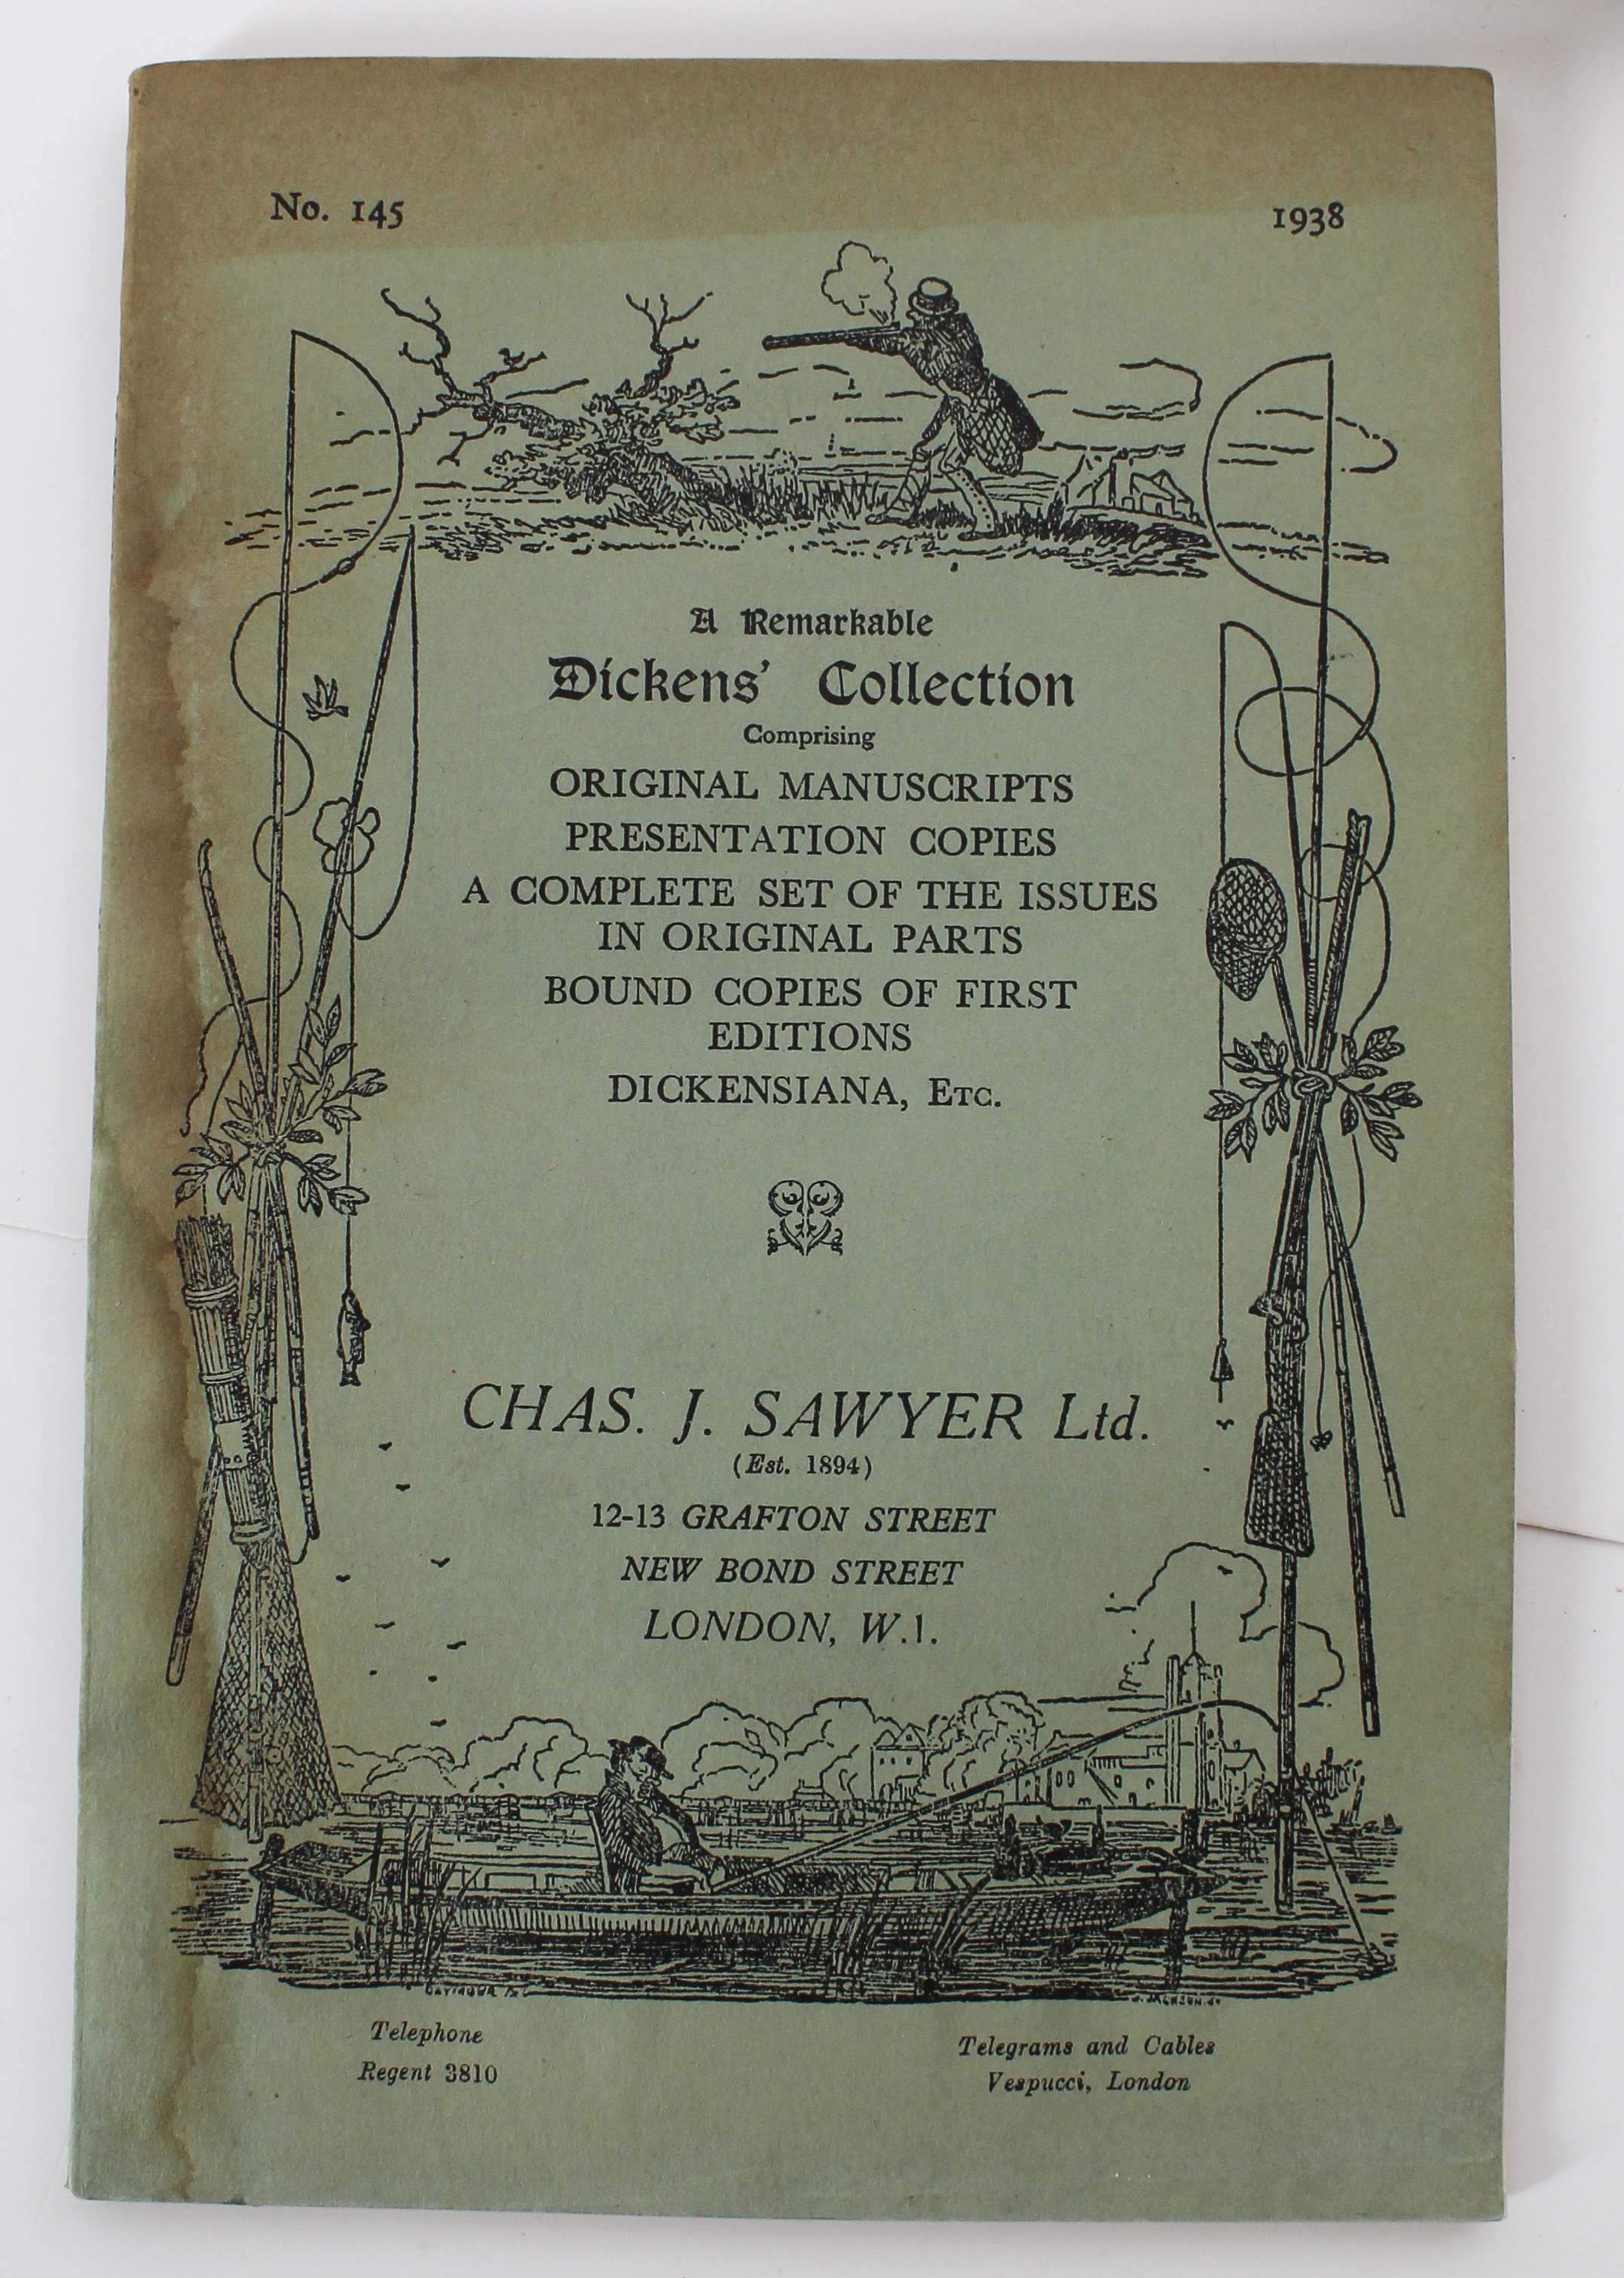 Dickens Auction Sales Catalogues 1916-1971 - Image 4 of 5